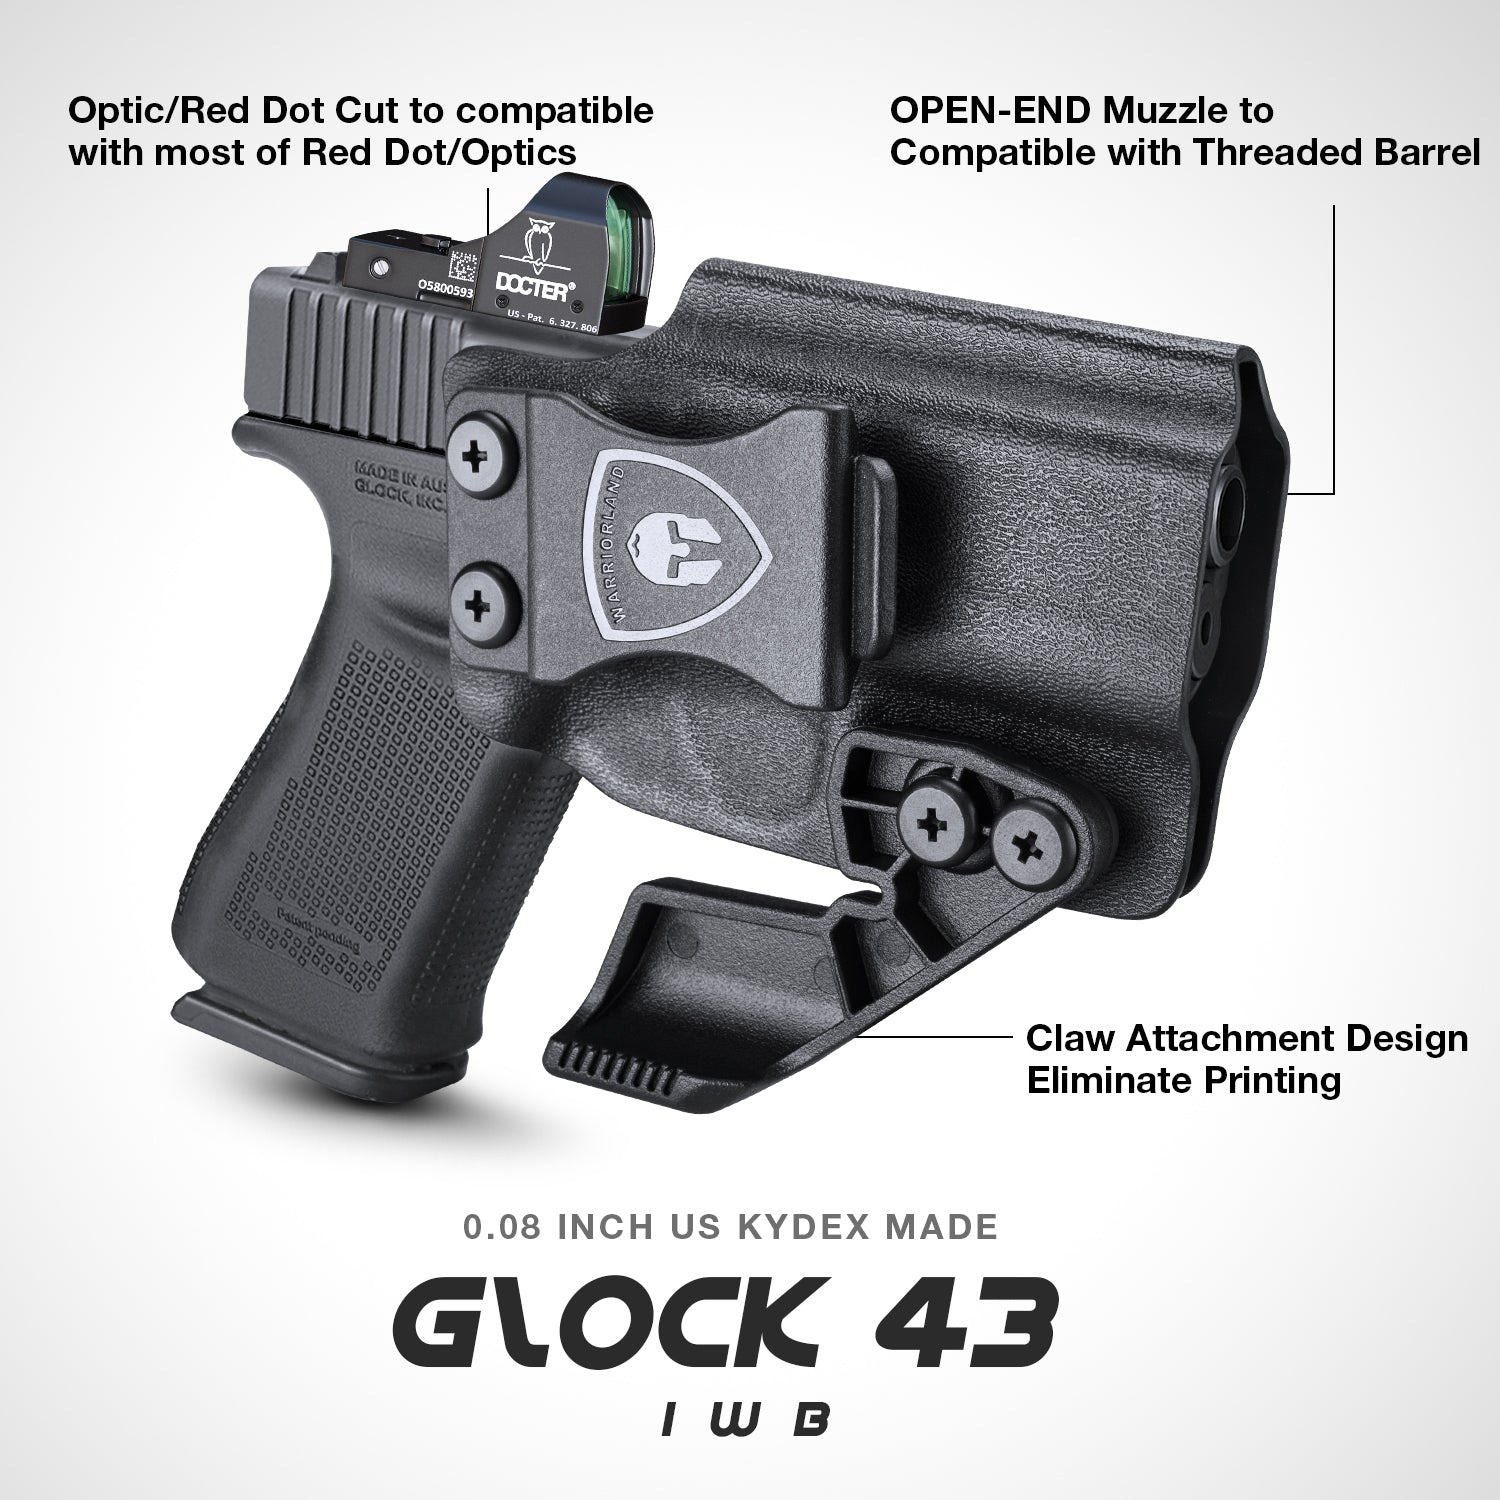 Glock 43 43x IWB Kydex Holster with Claw Red Dot Optics Cut Appendix Concealment Carry Trigger Guard Holsters for Fat Guys | WARRIORLAND